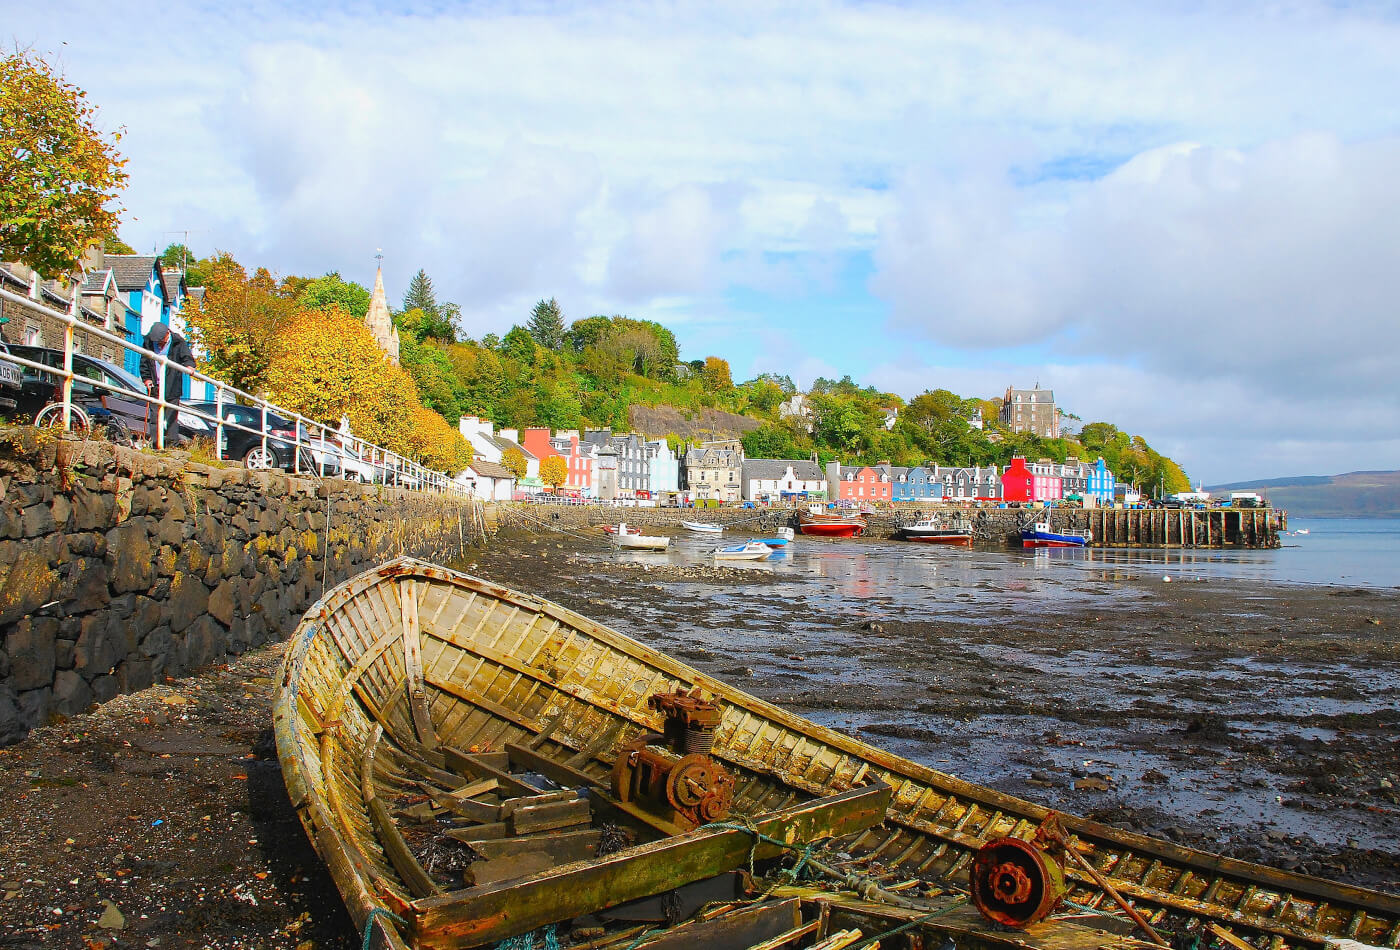 A derelict boat on the shore seen against a background of multi coloured houses in Tobermory on the Isle of Mull